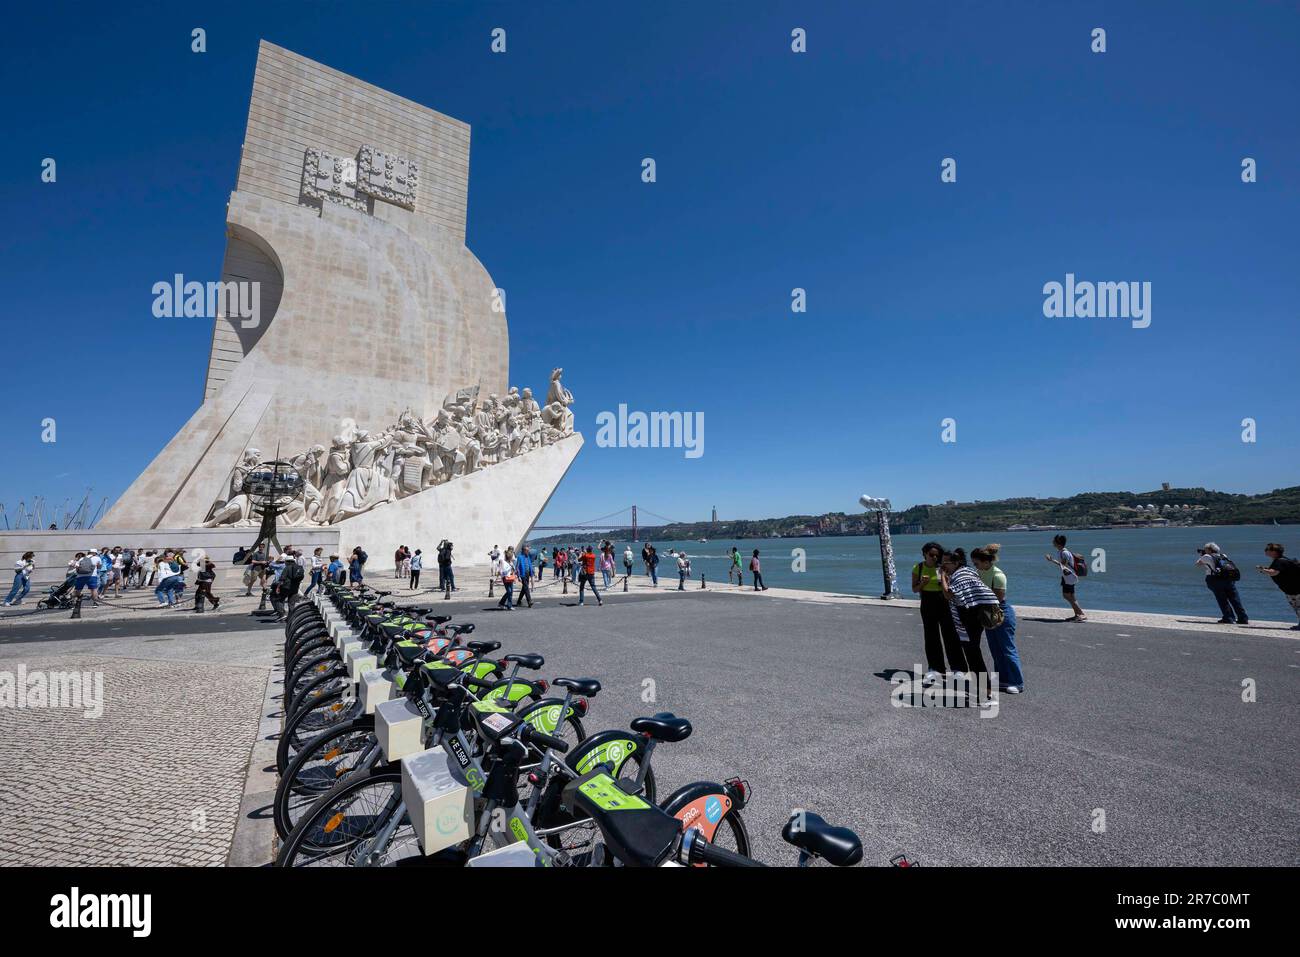 General view of the Monument to the Discoveries in the vicinity of the Rio Tejo promenade. The monument is a gigantic structure built in 1960 on the banks of the Tejo River in Belém, Lisbon, to commemorate the 500th anniversary of the death of Henry the Navigator and also to honor the memory of all those who were involved in the progress of the Age of Discoveries. Author of the work were the architect José Ângelo Cottinelli Telmo and the sculptor Leopoldo de Almeida, who were responsible for the sculptures. (Photo by Jorge Castellanos/SOPA Images/Sipa USA) Stock Photo